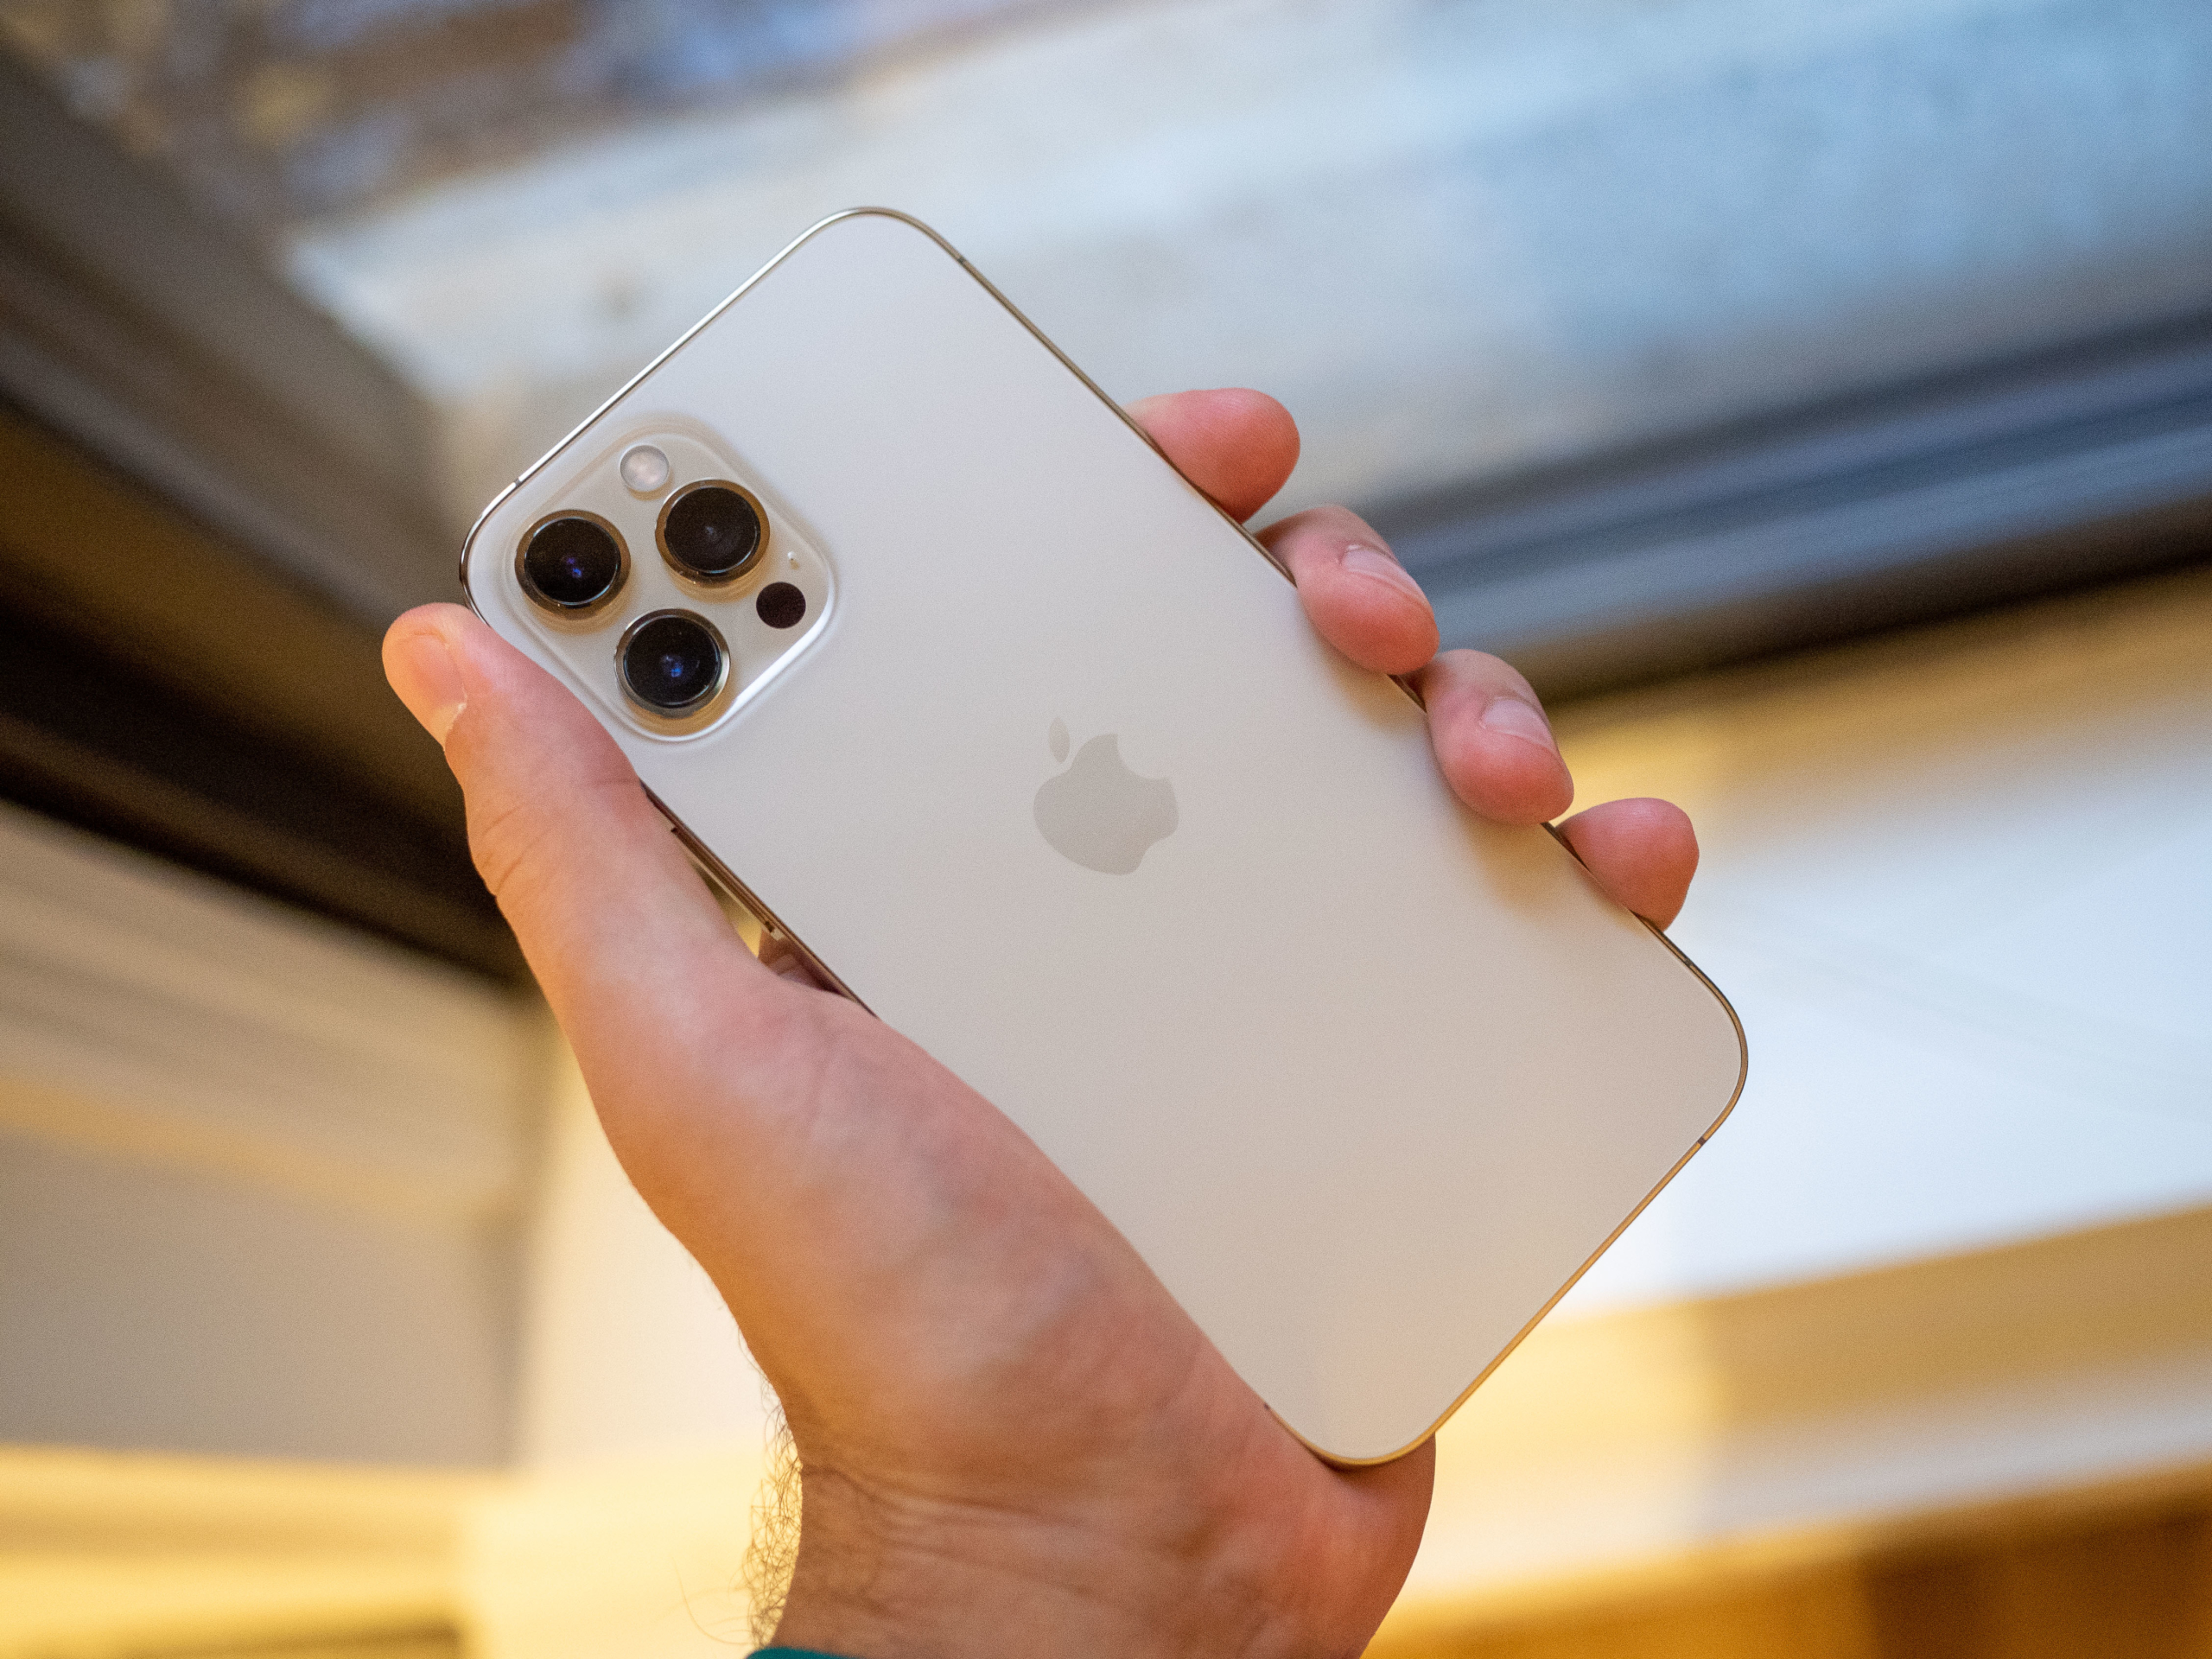 iPhone 12 Pro Max review: Easily the best smartphone camera ever